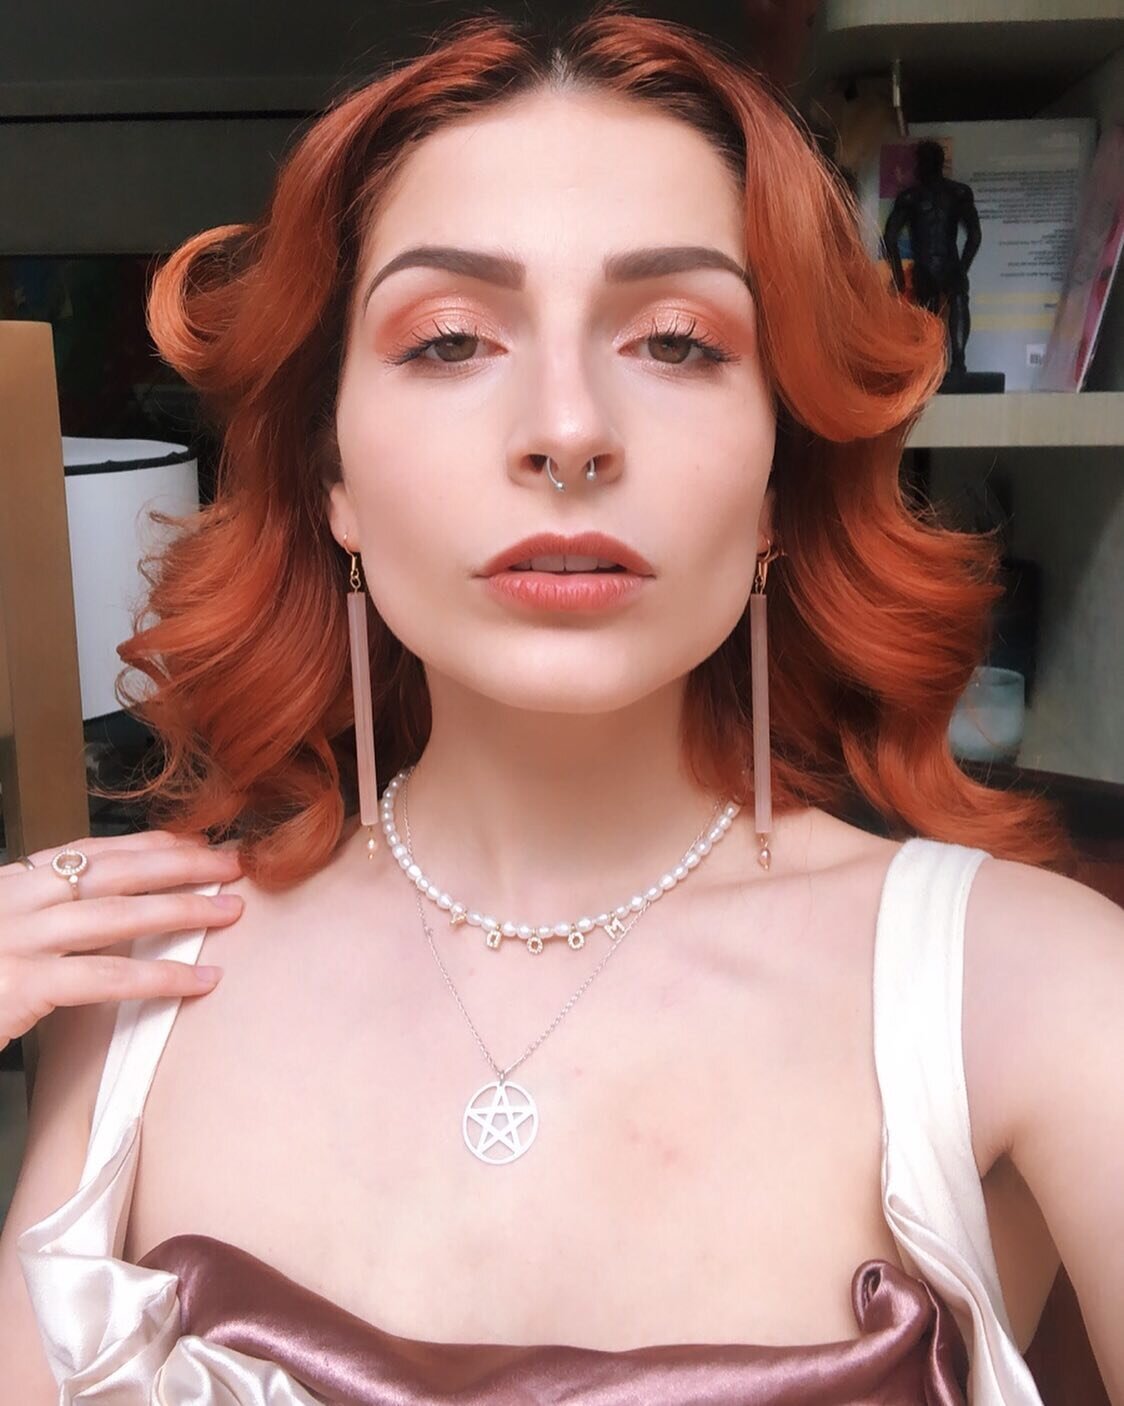 Getting my hair done next week and cannot wait to feel like this Goddess again ✨Being a mixture of Artemis and Aphrodite is the contradiction I live to be 💋

Who&rsquo;s your favourite god/goddess?